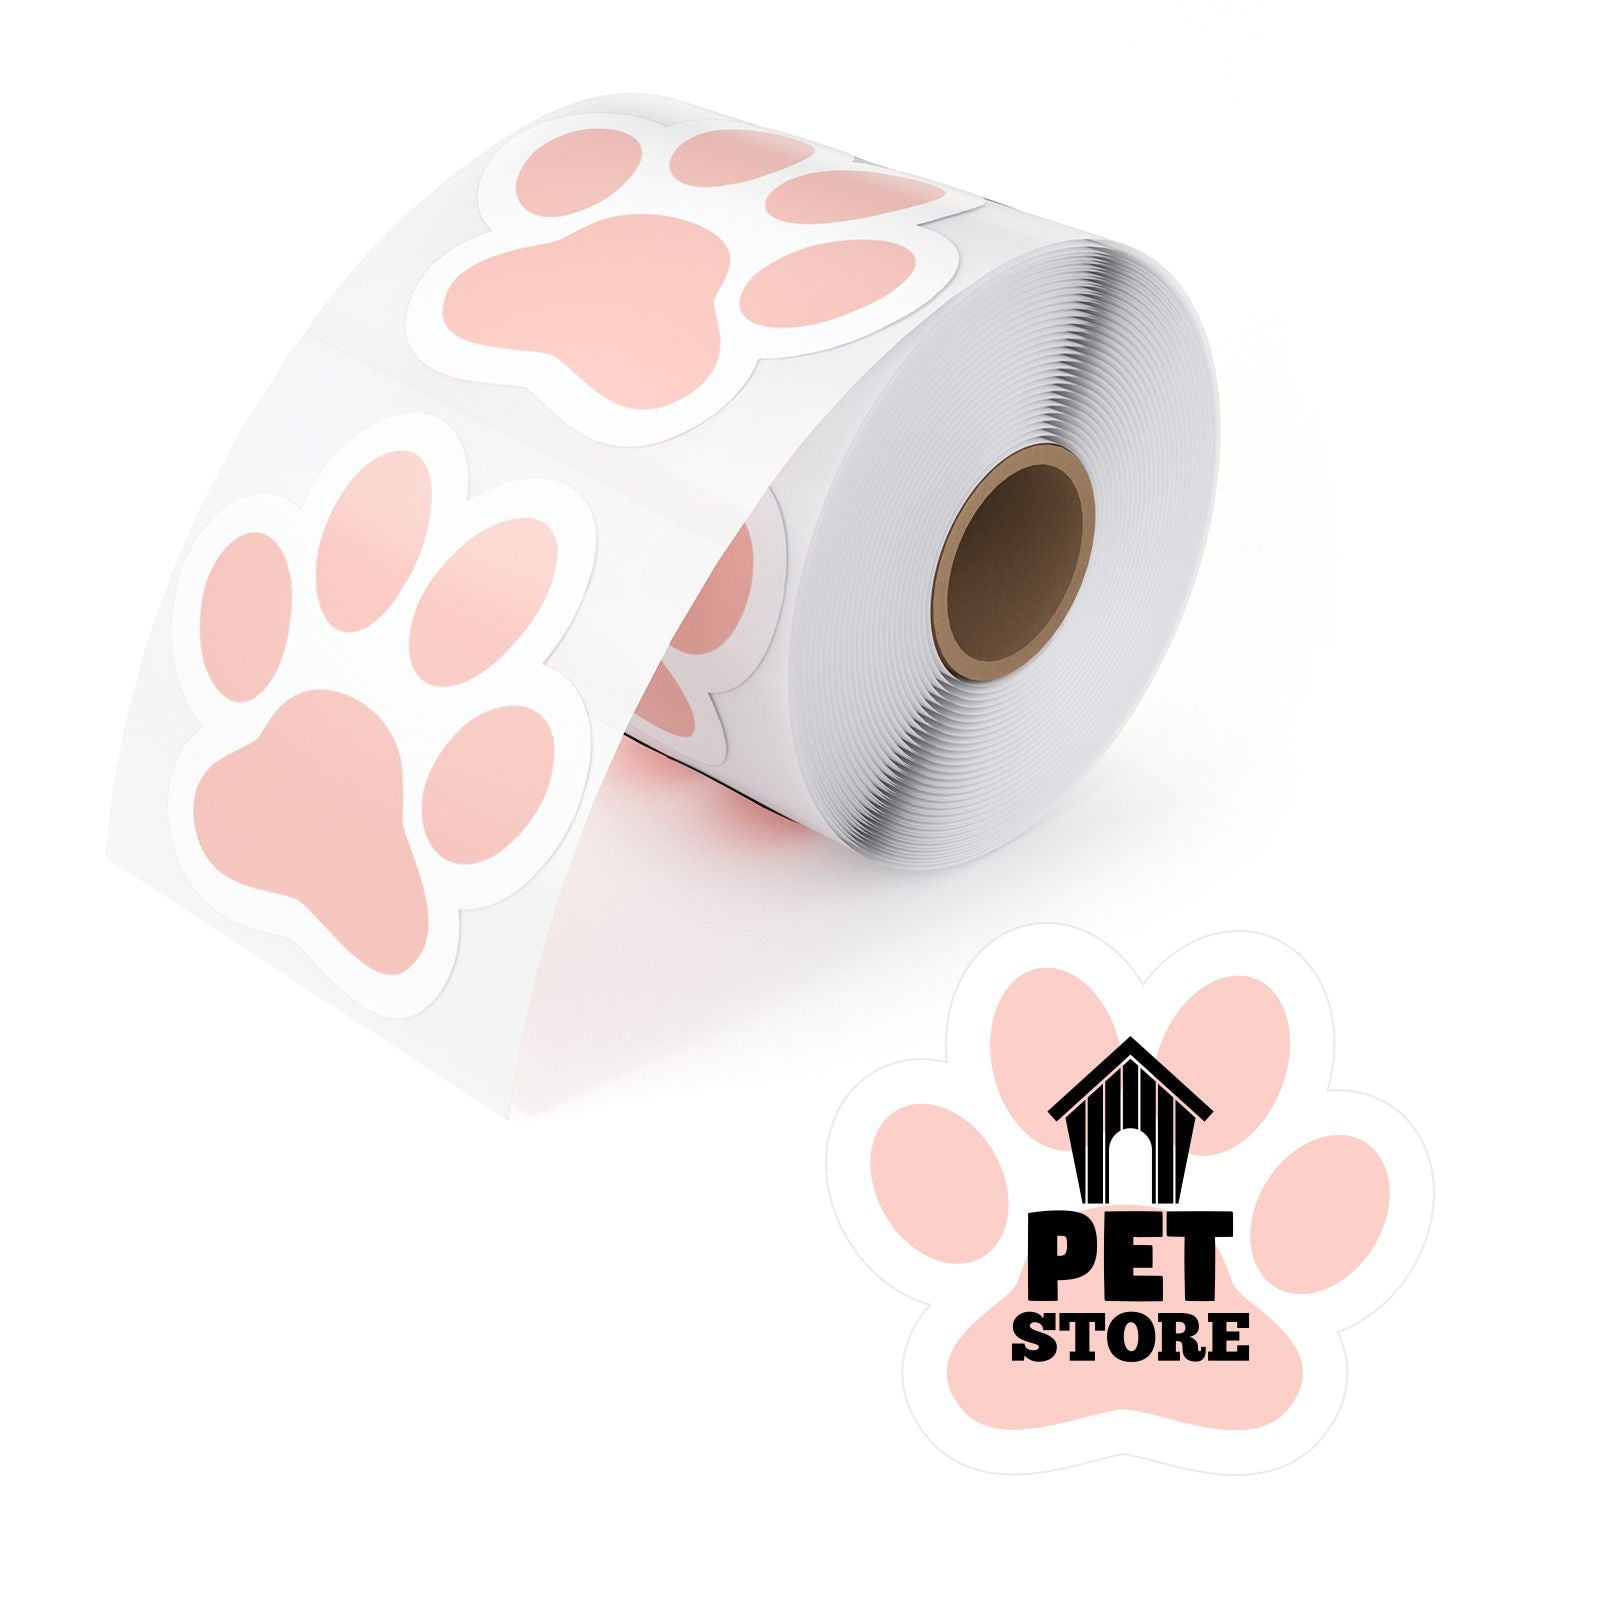 MUNBYN paw-shaped thermal labels are an excellent labeling solution for businesses that want to add a fun and playful touch to their products or gifts.